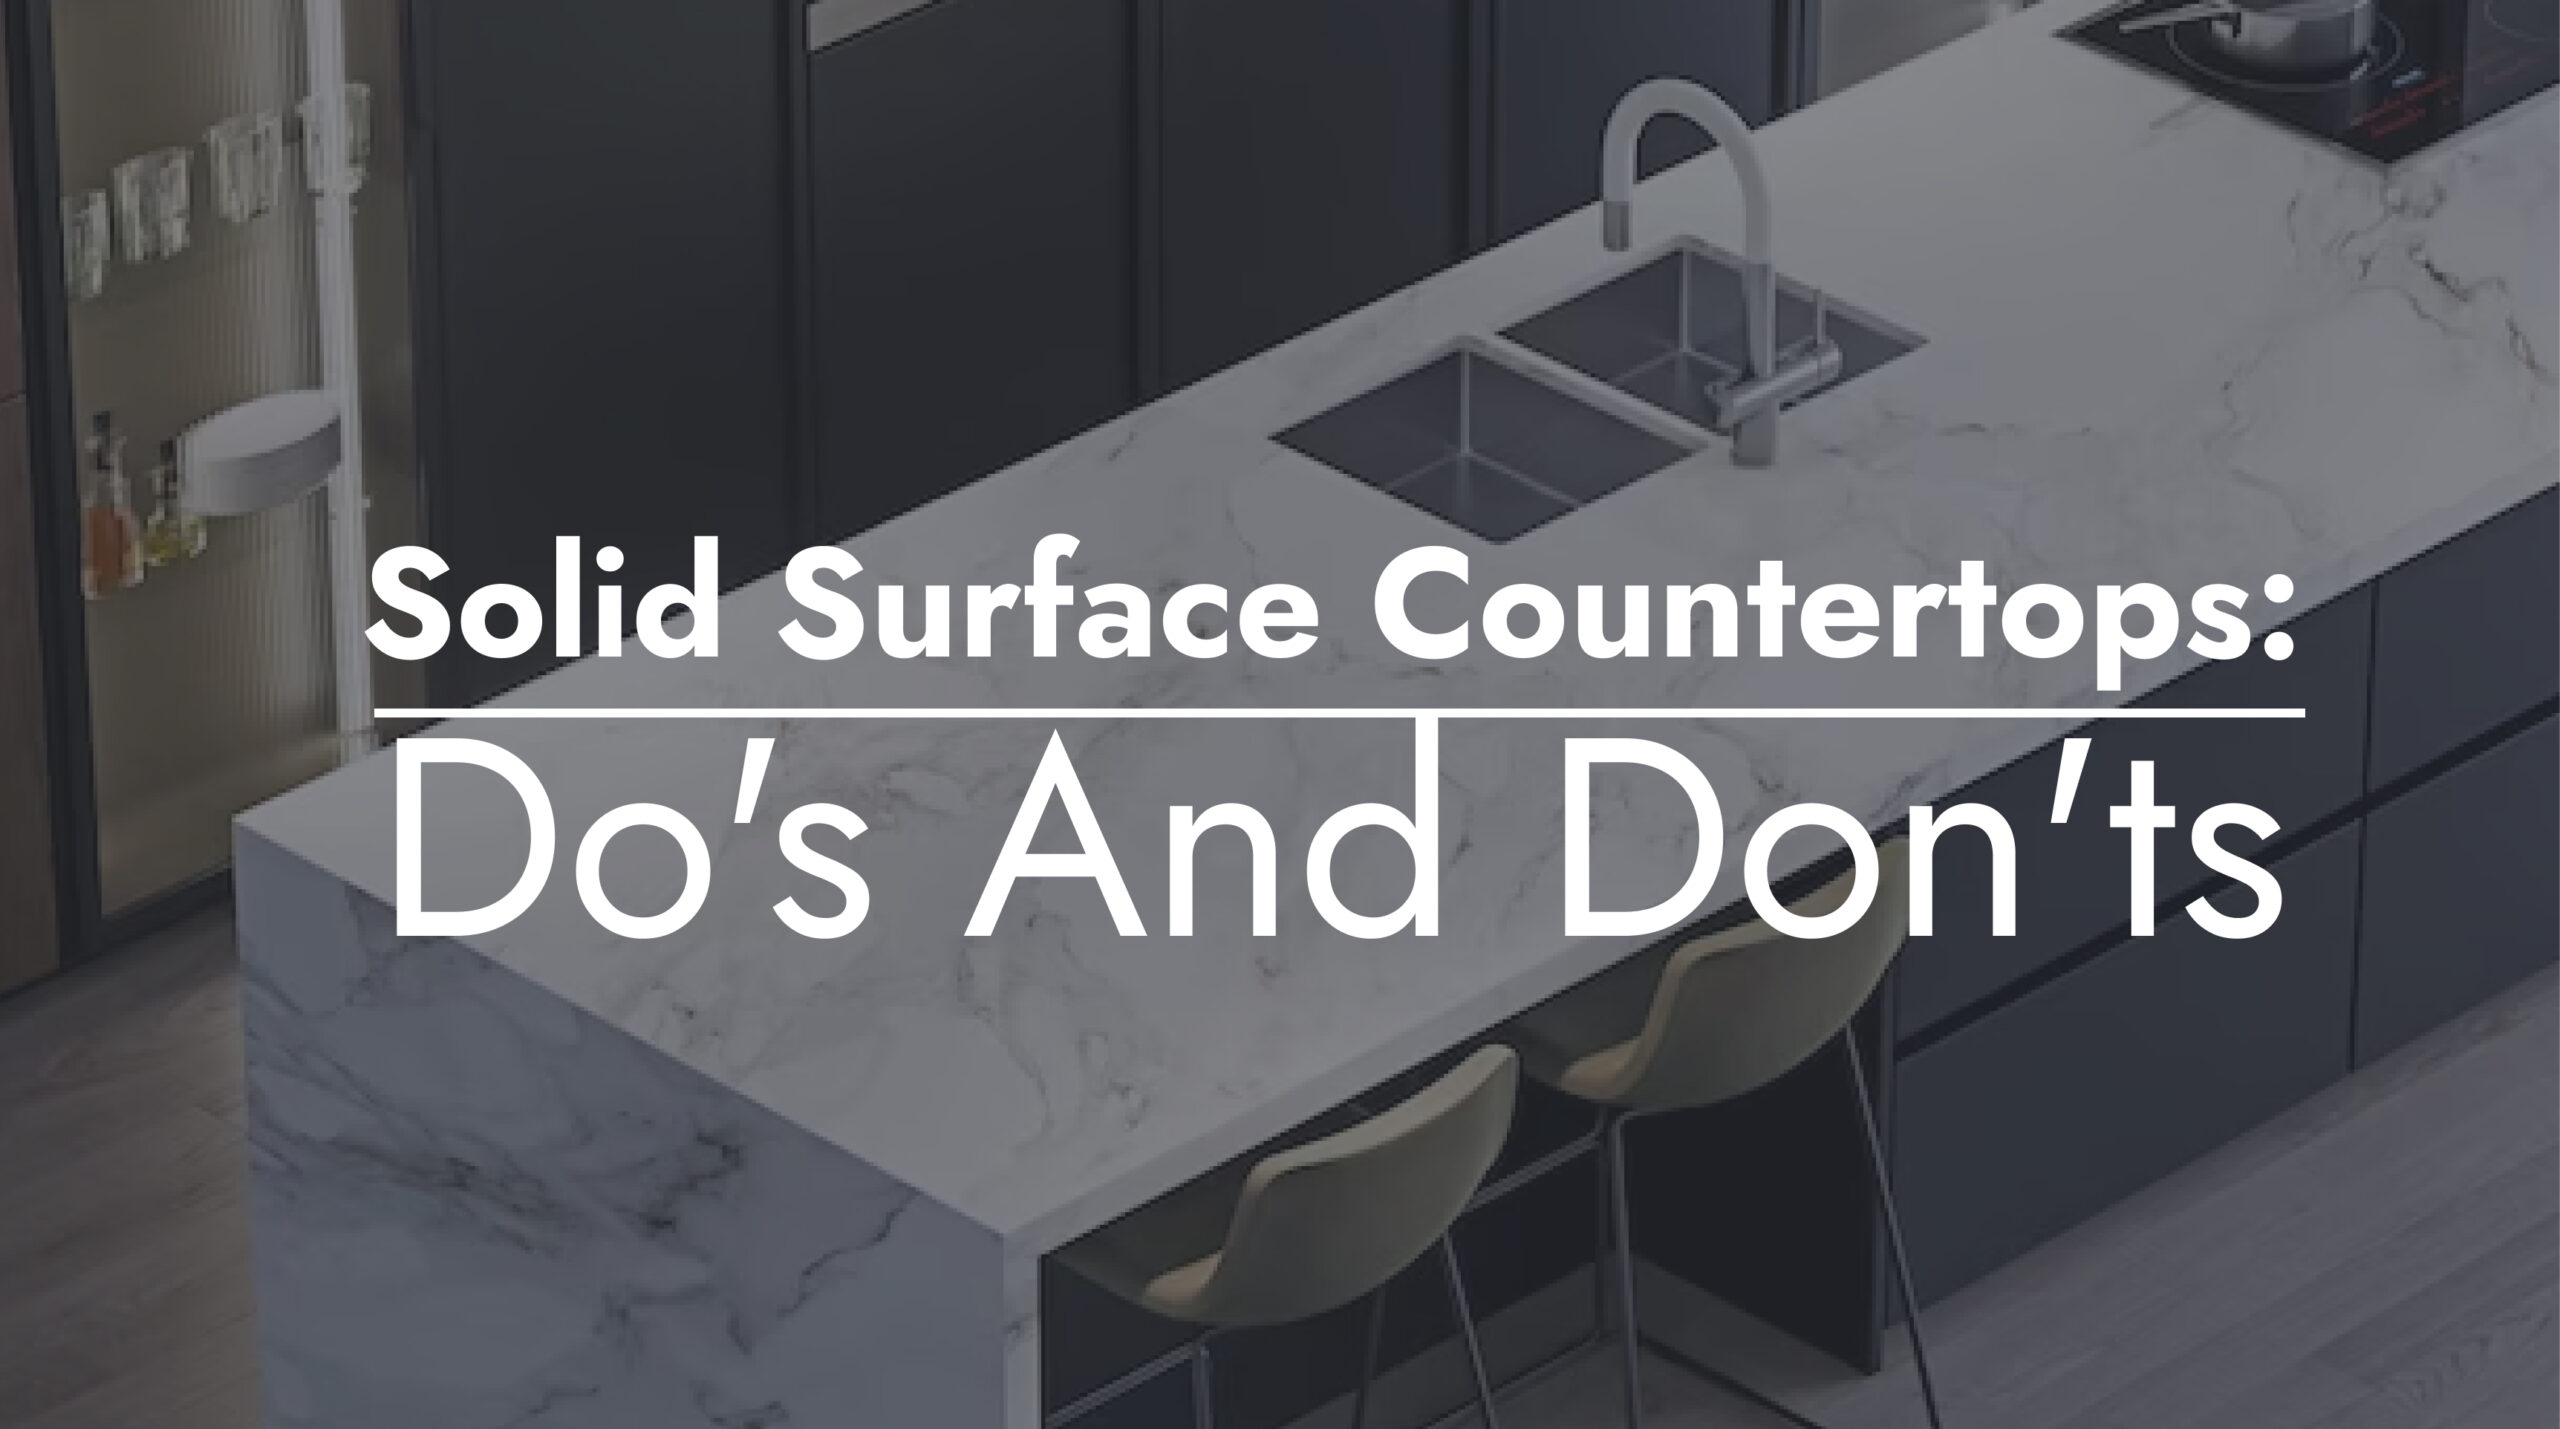 Solid Surface Countertops Do's And Don'ts